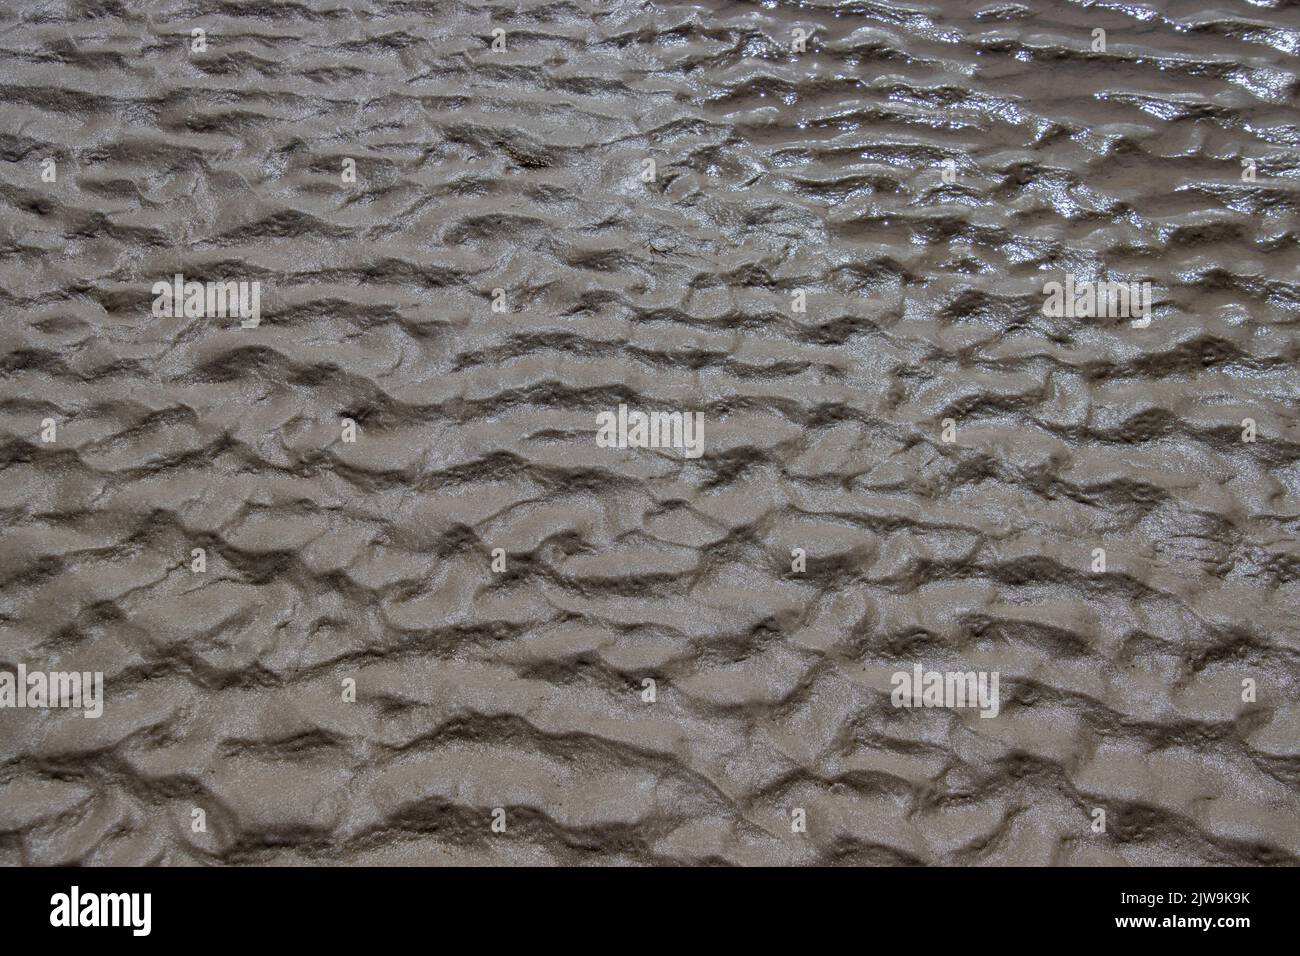 Wet abstract sand pattern for background Stock Photo